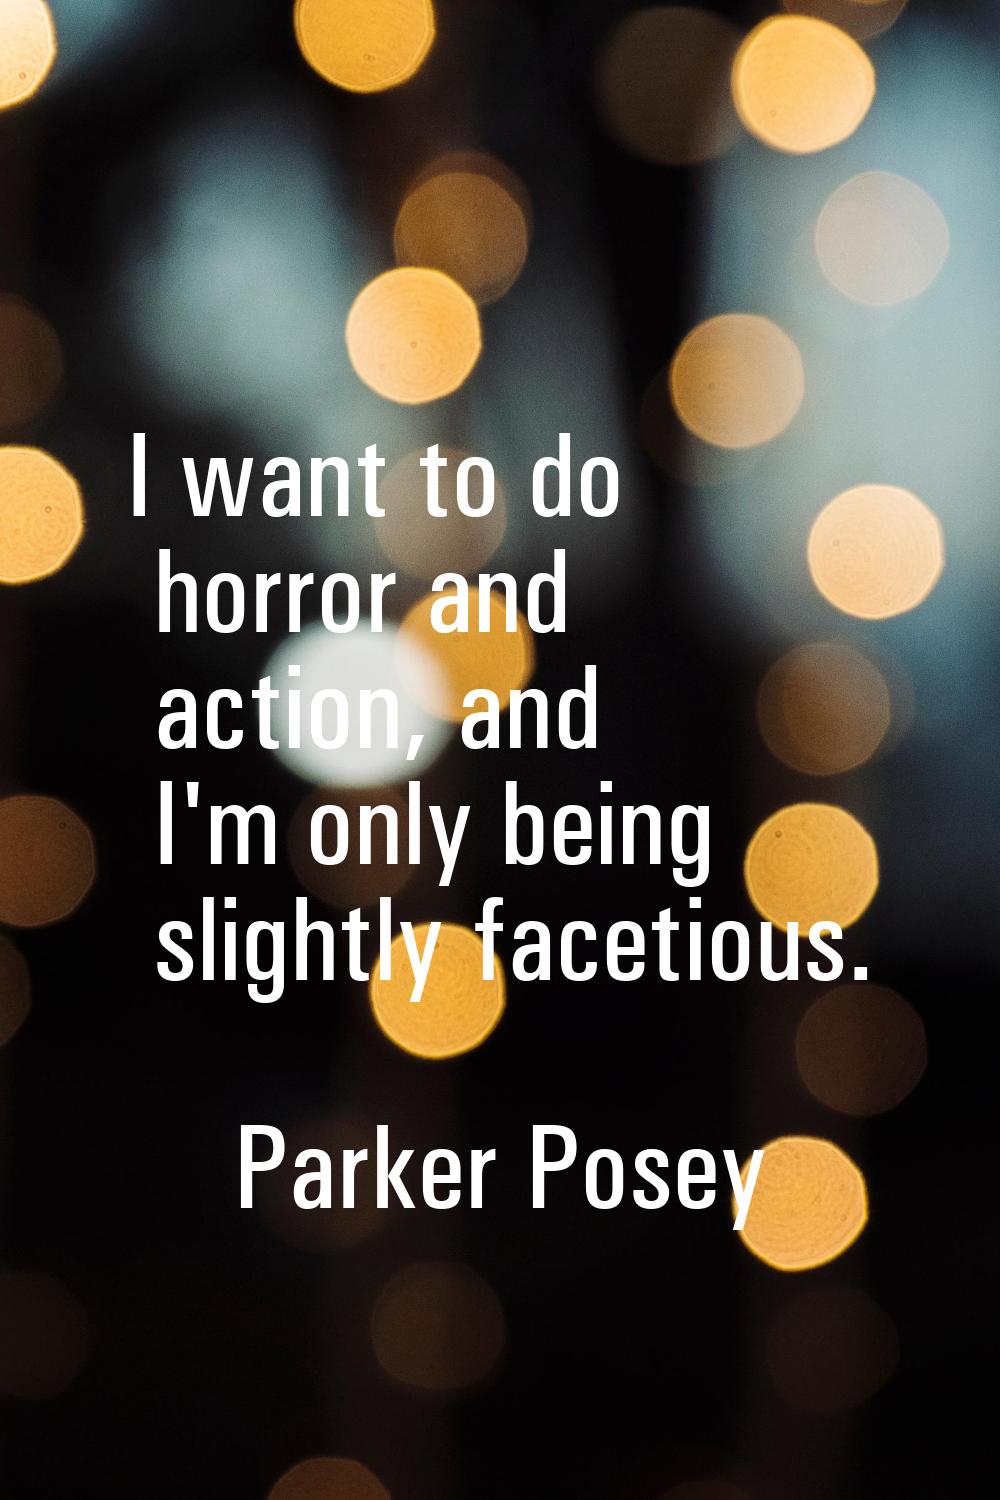 I want to do horror and action, and I'm only being slightly facetious.